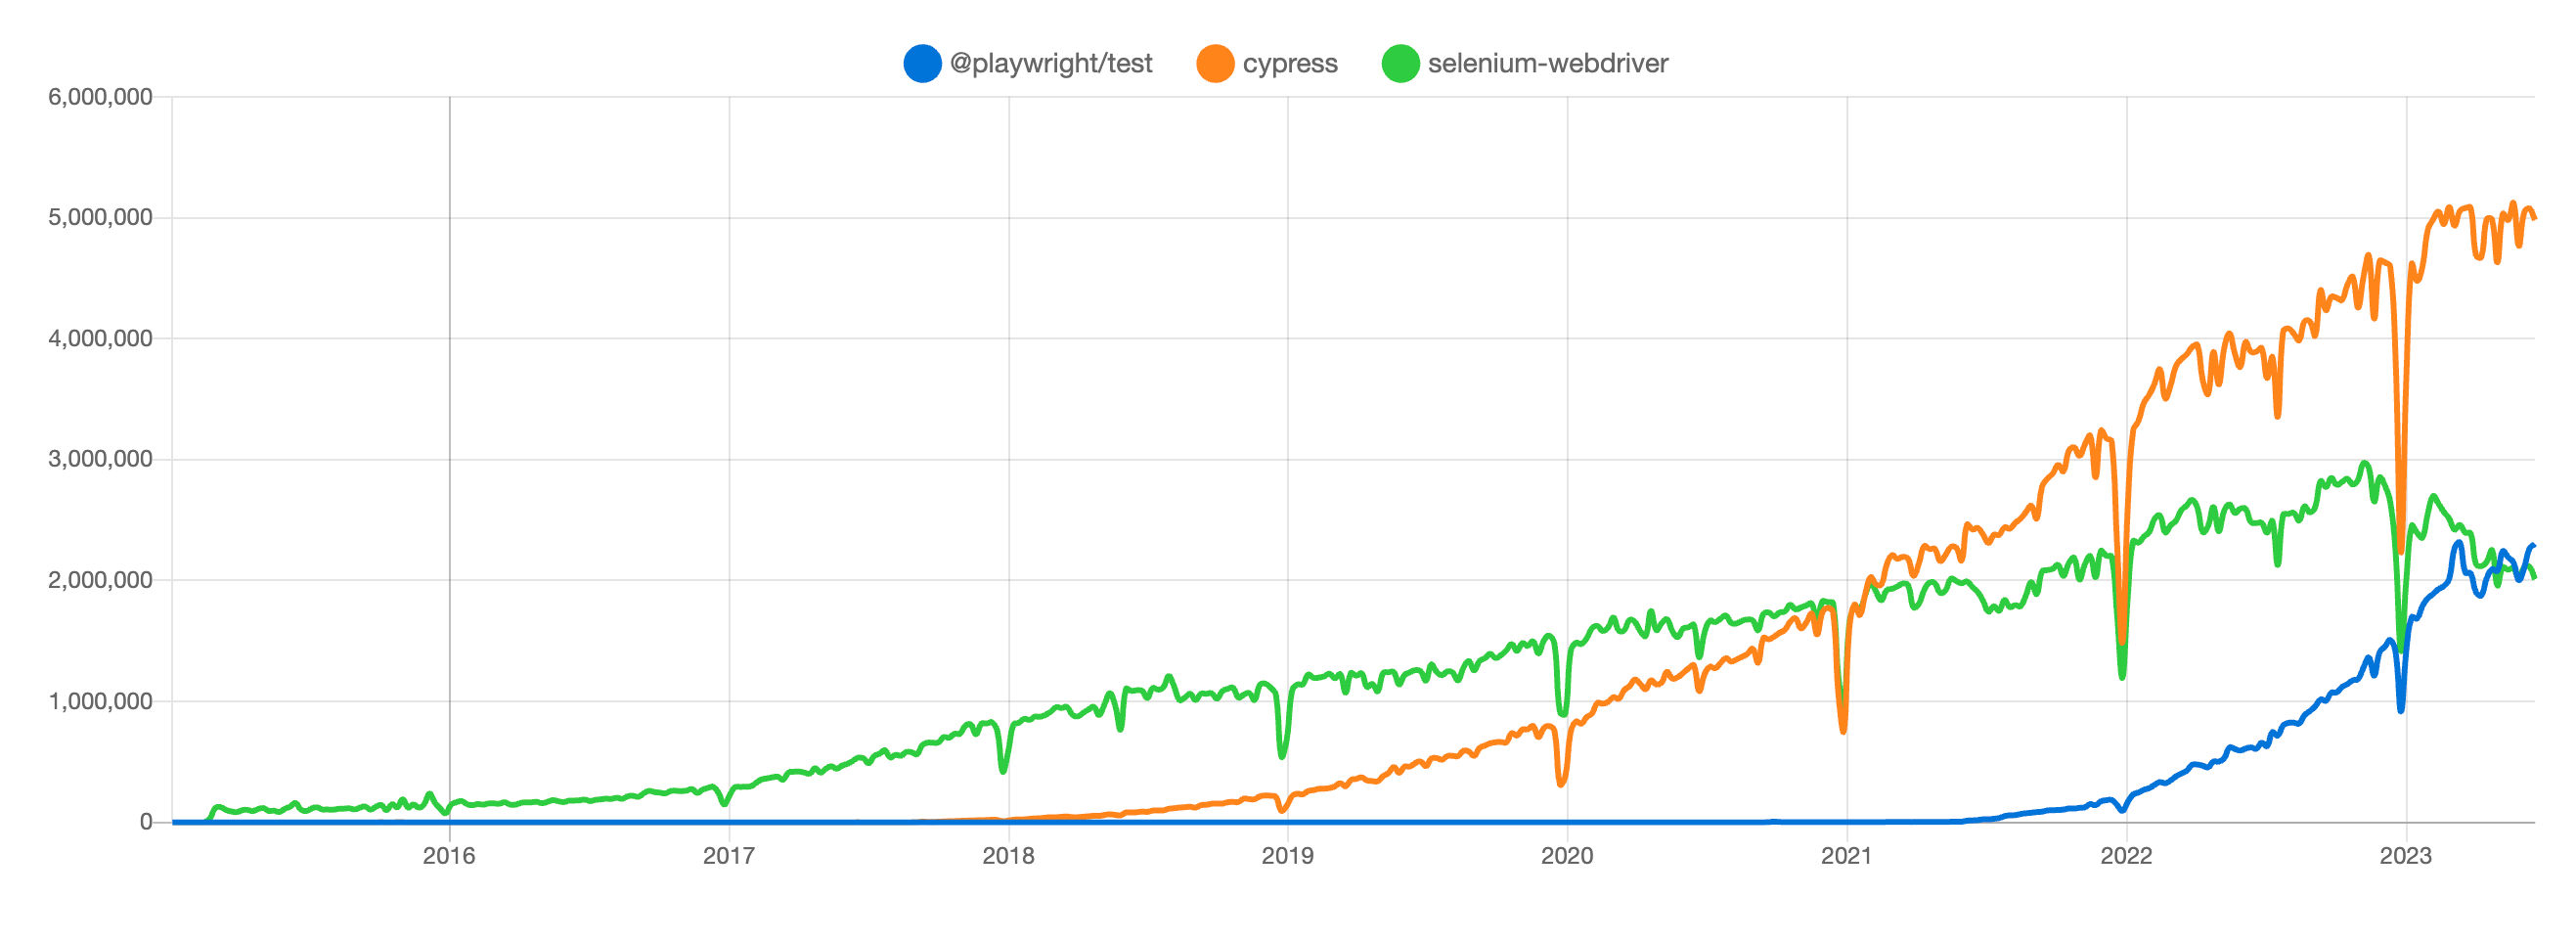 Playwright NPM downloads history